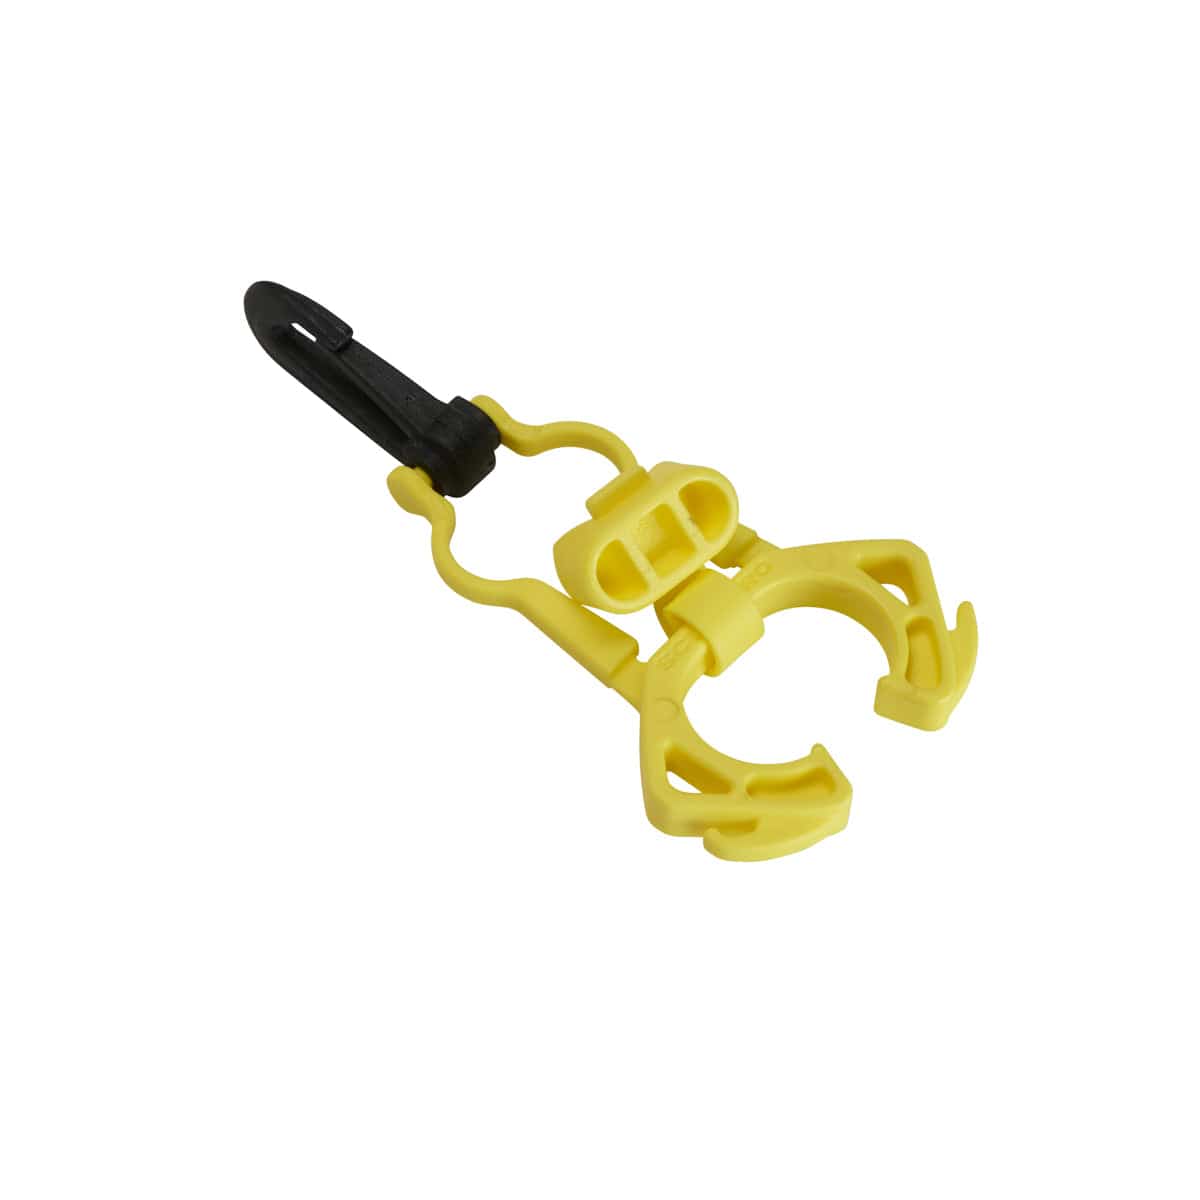 ScubaPro Related Scubapro Octopus Retainer and Plug w/clip